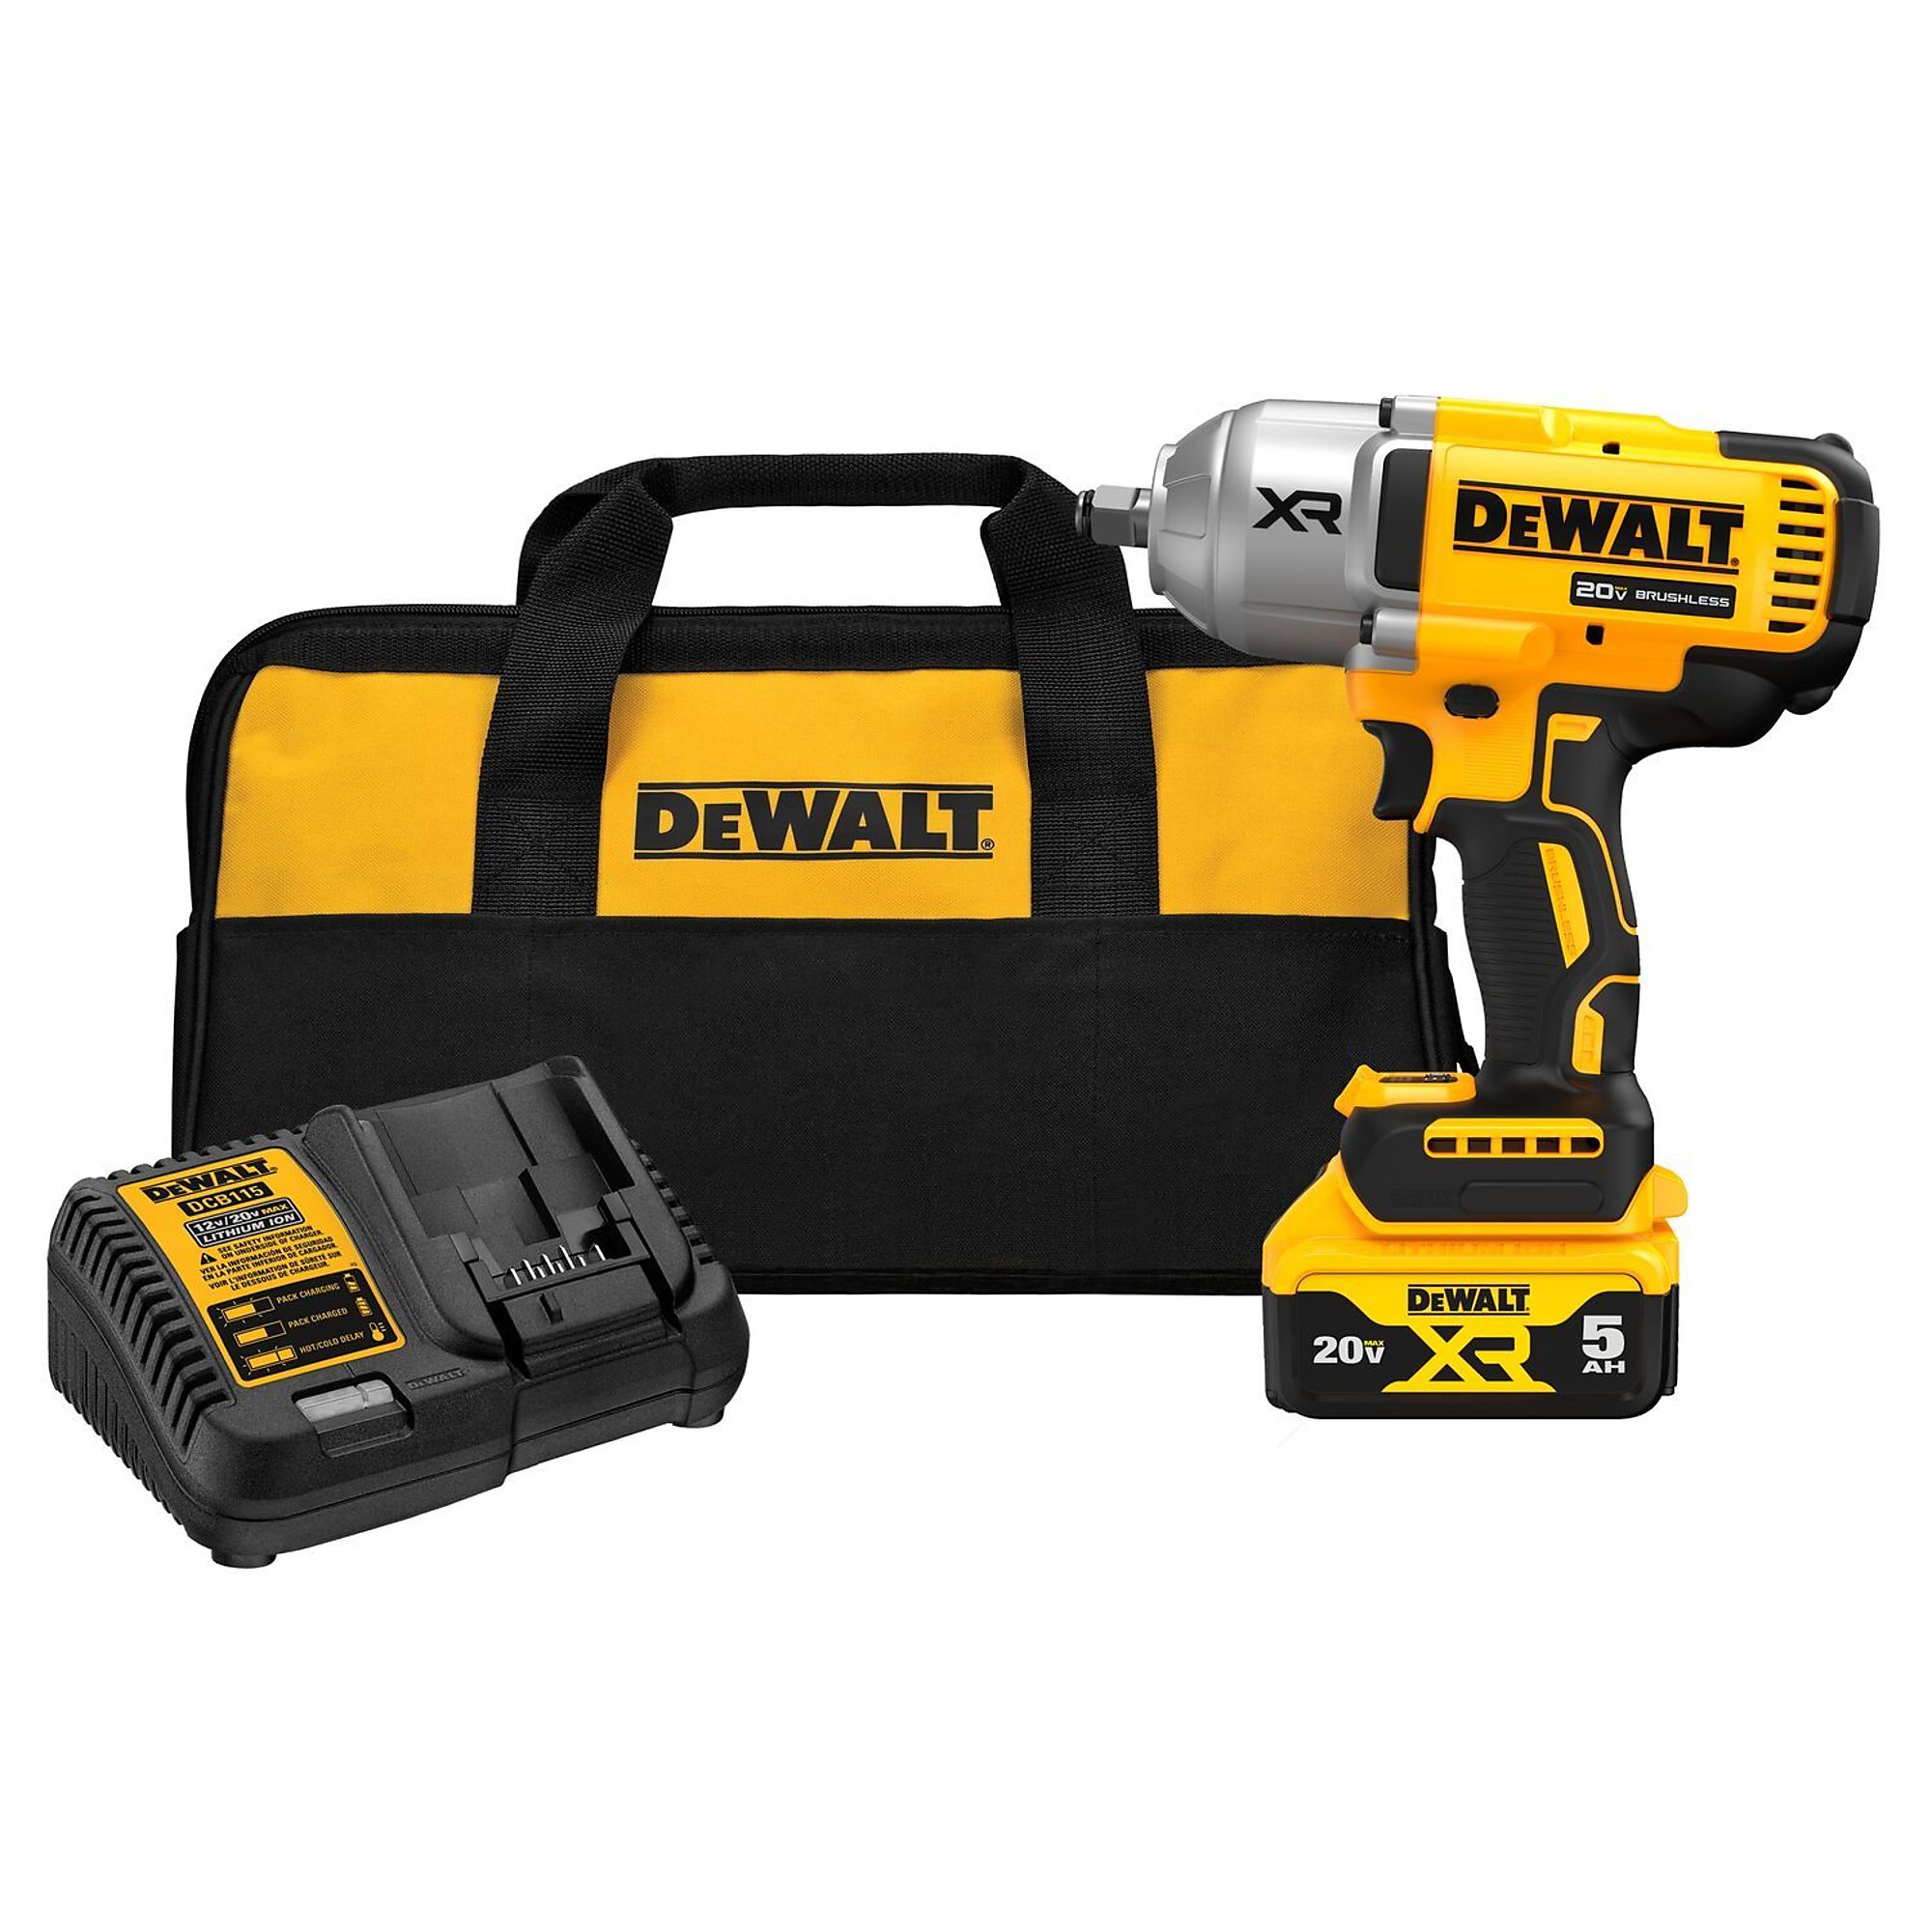 DEWALT, 20v MAX 1/2Inch High Torque Impact Wrench Kit, Drive Size 1/2 in, Volts 20 Battery Type Lithium-ion, Model DCF900P1